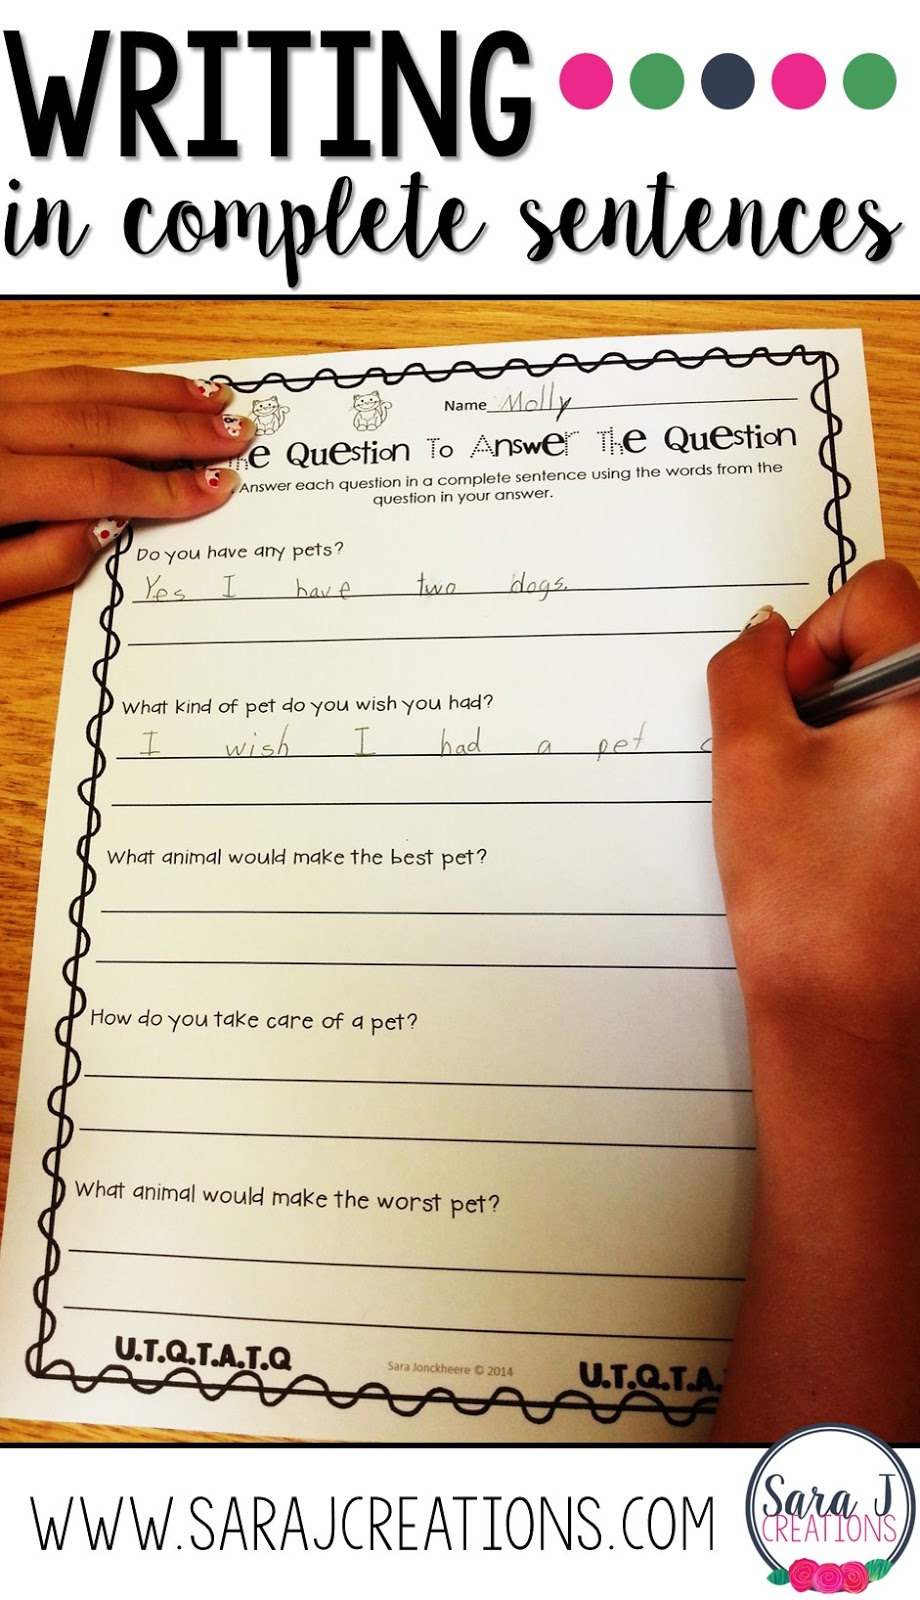 Getting Your Students To Write In Complete Sentences Sara J Creations